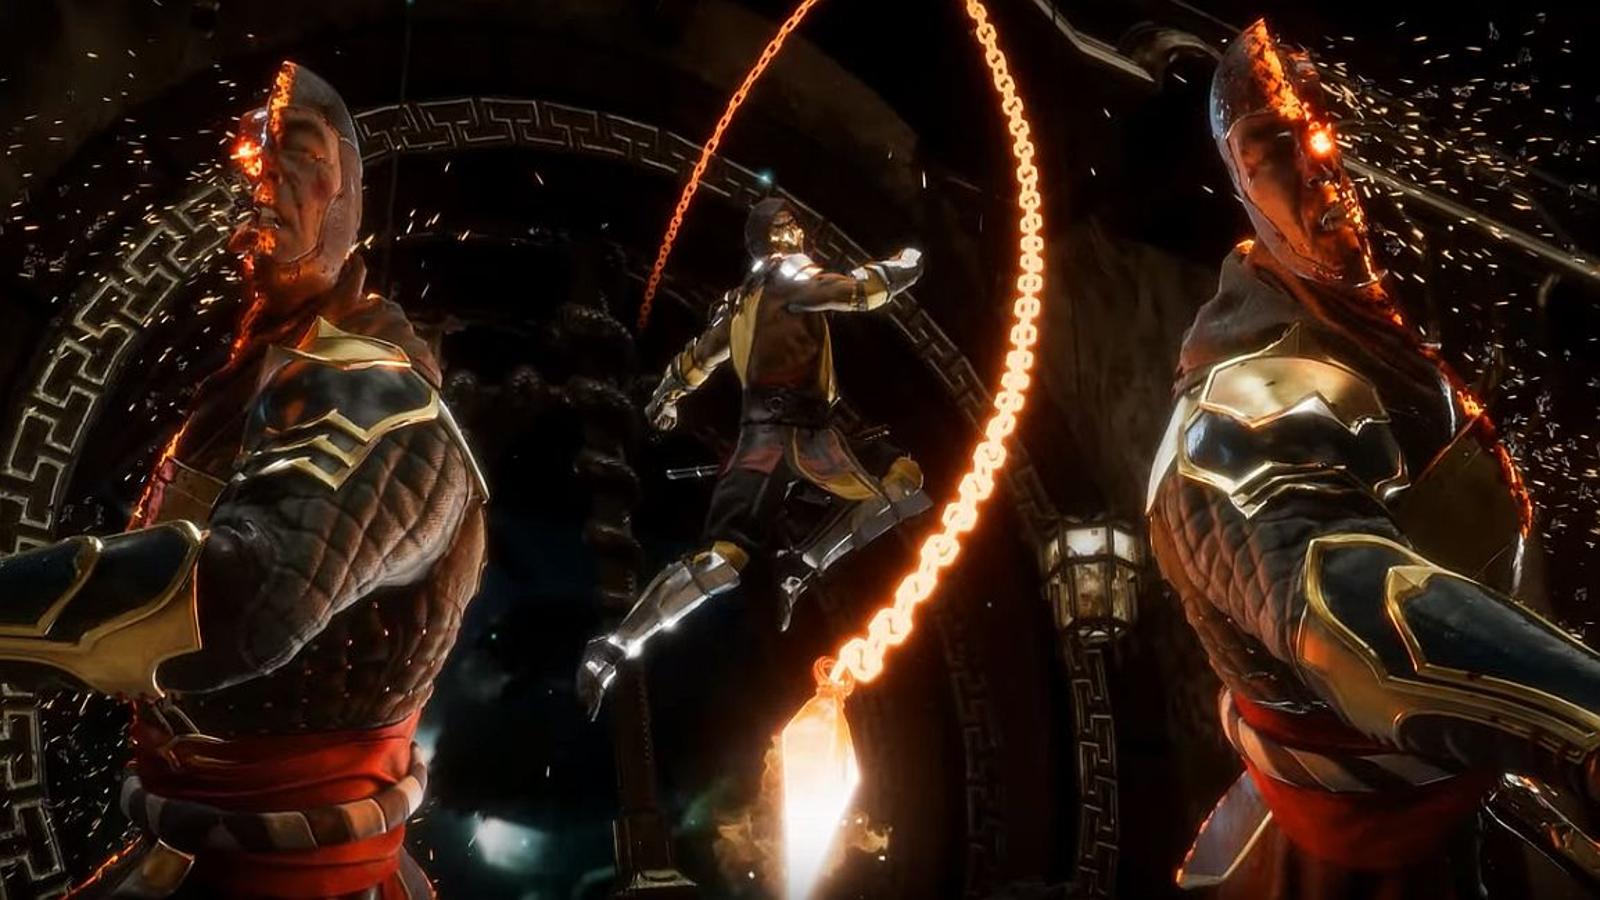 Mortal Kombat 11 Fatalities guide: Controls for each console